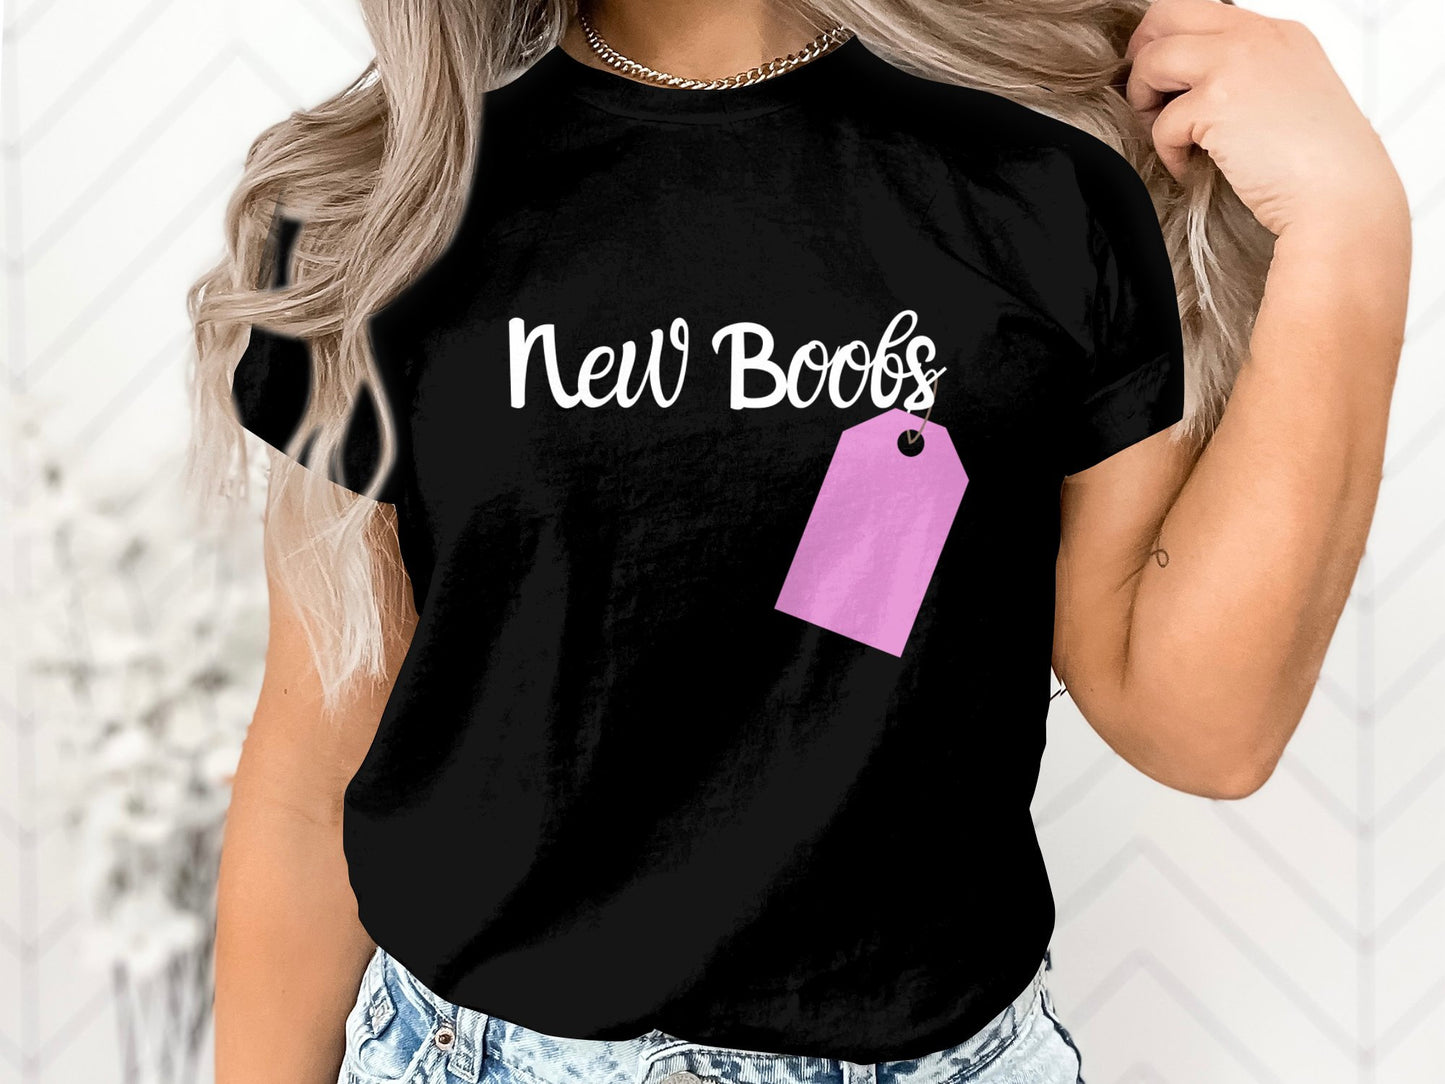 New Boobs T-Shirt - Celebrate Body Positivity and Feminism